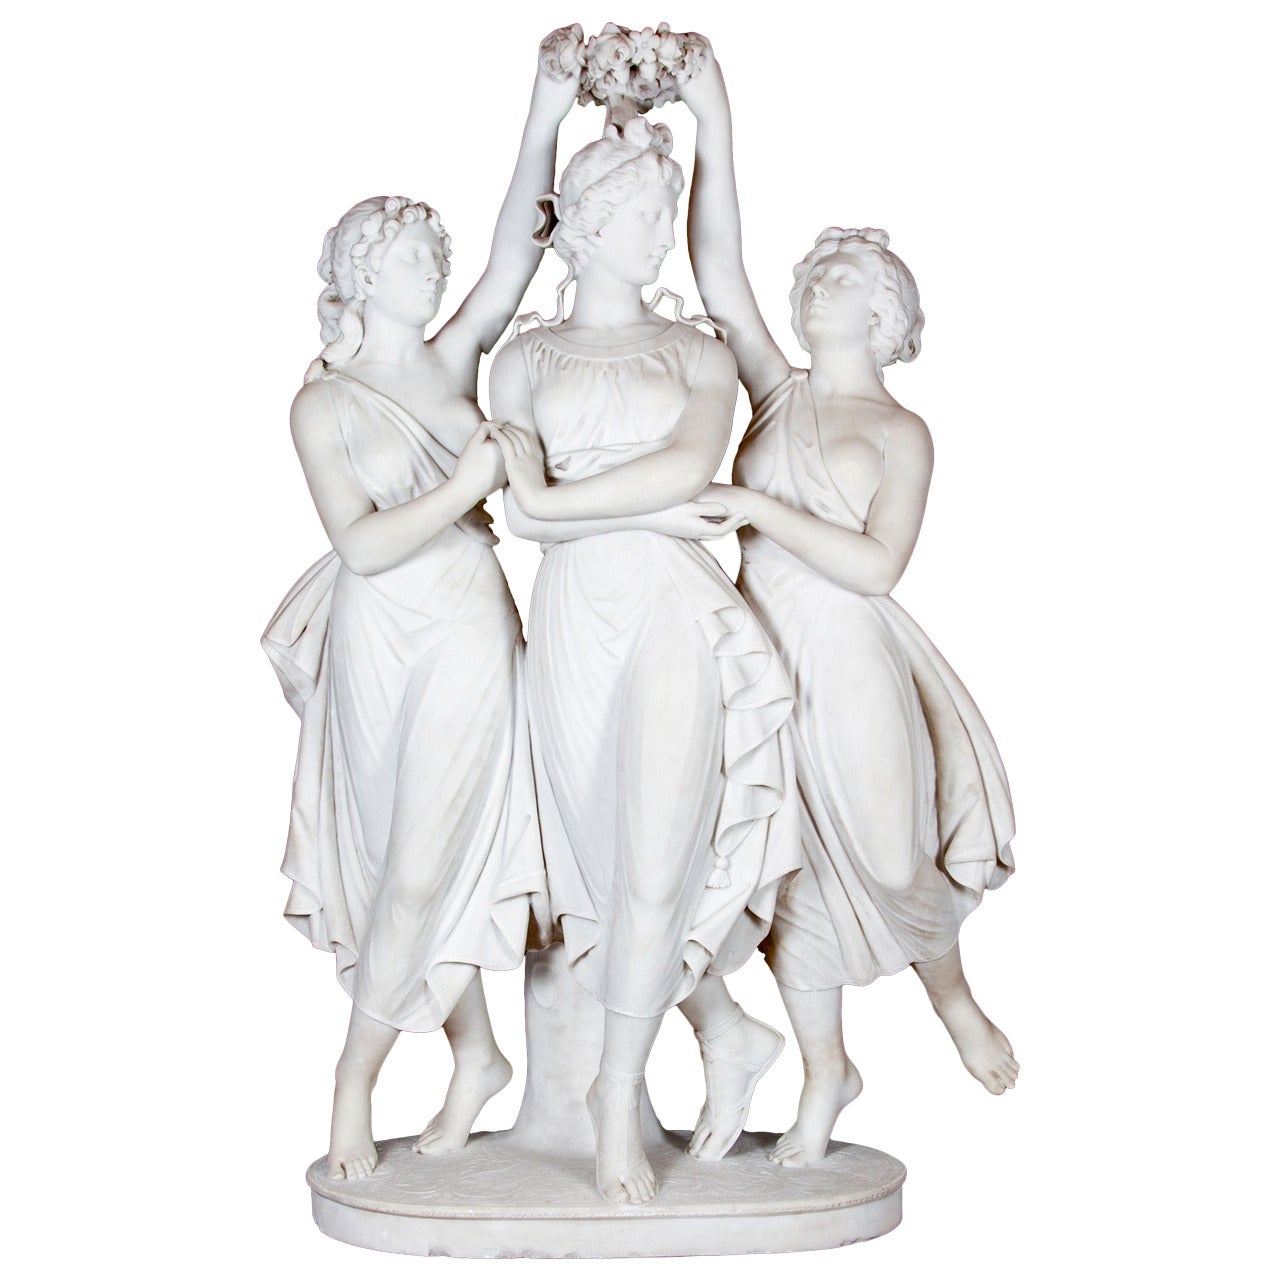 Marble Sculpture of the Three Graces Crowning Venus by Antonio Frilli